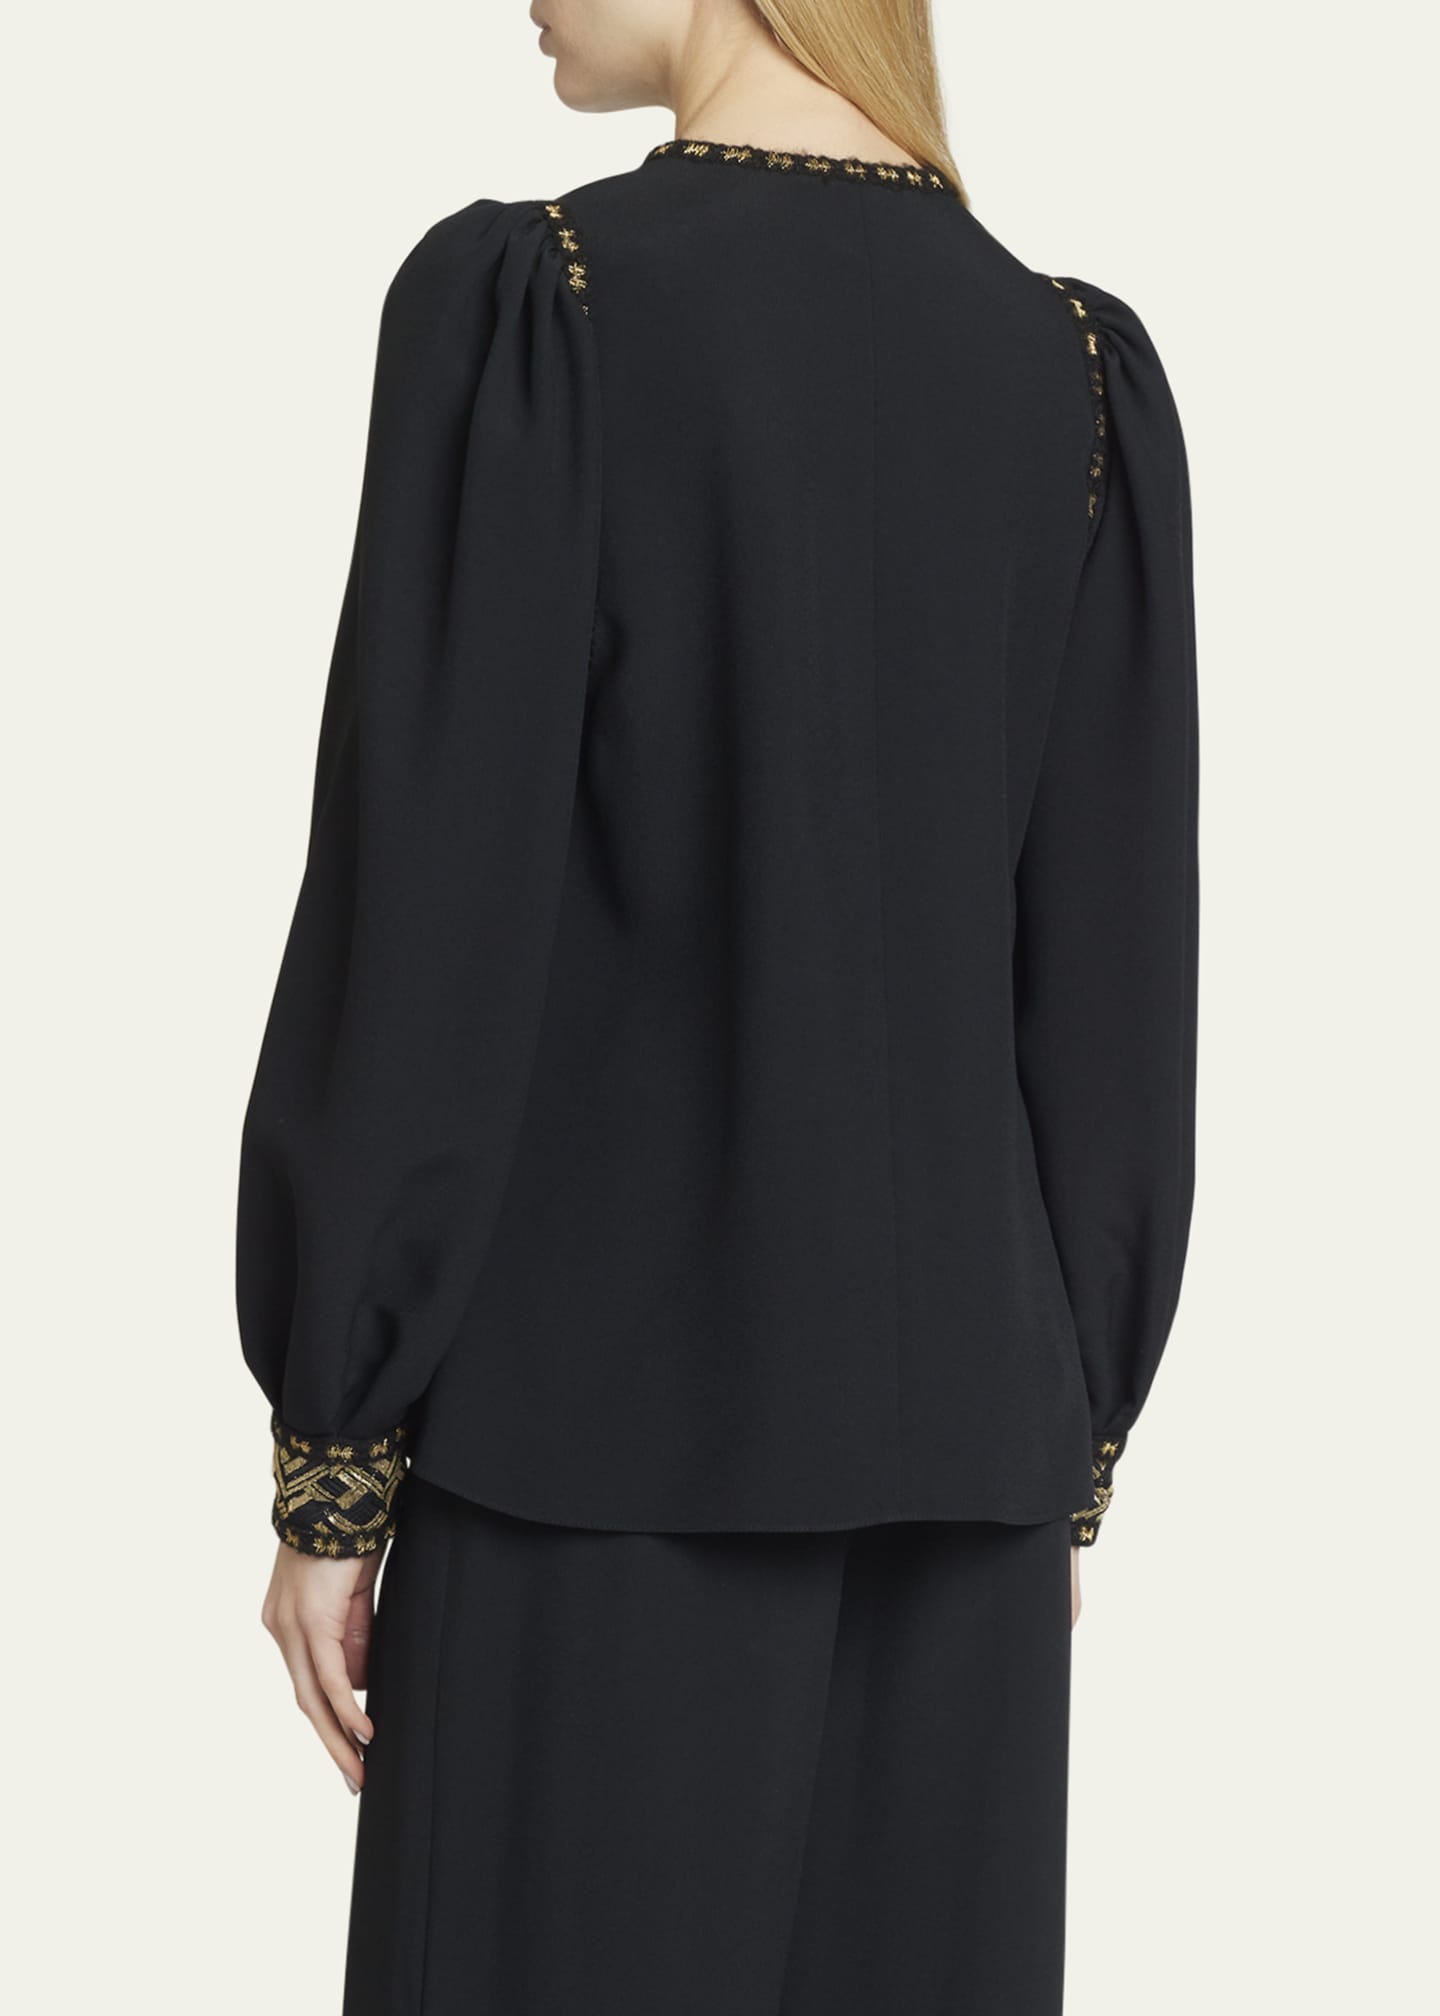 Andrew Gn Metallic-Embroidered Keyhole Blouse - Bergdorf Goodman